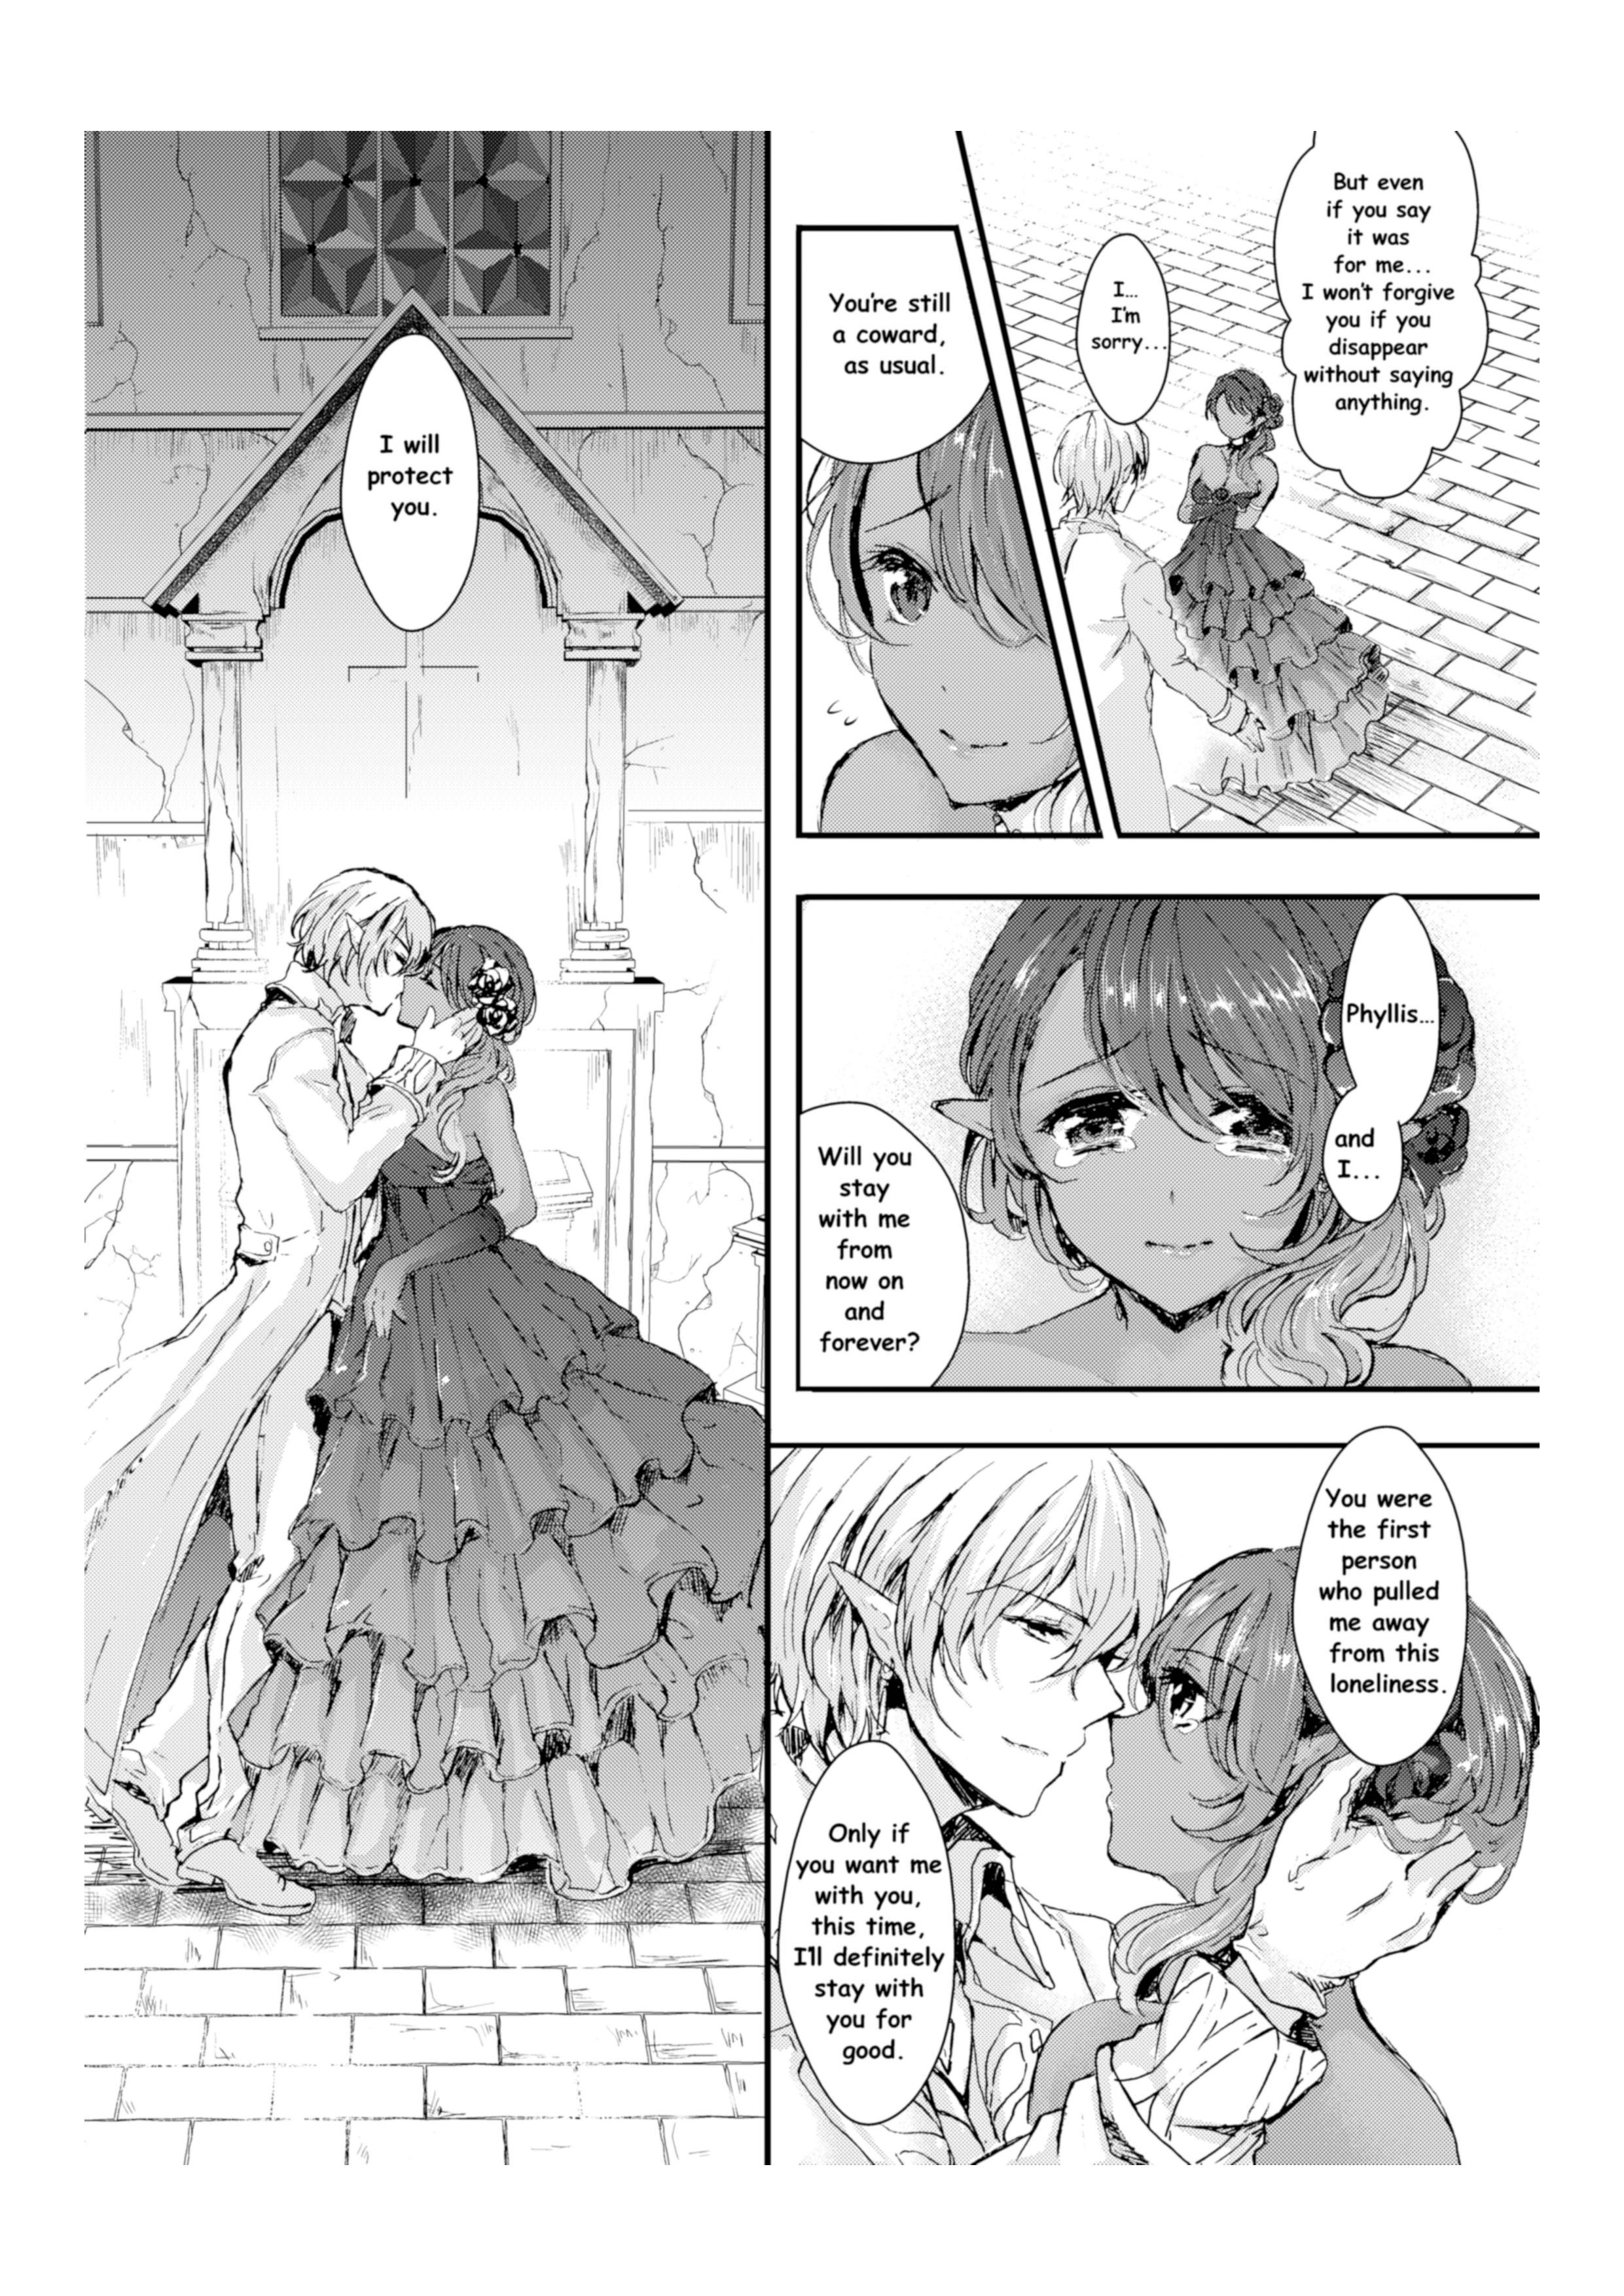 The Demon King and His Bride 27